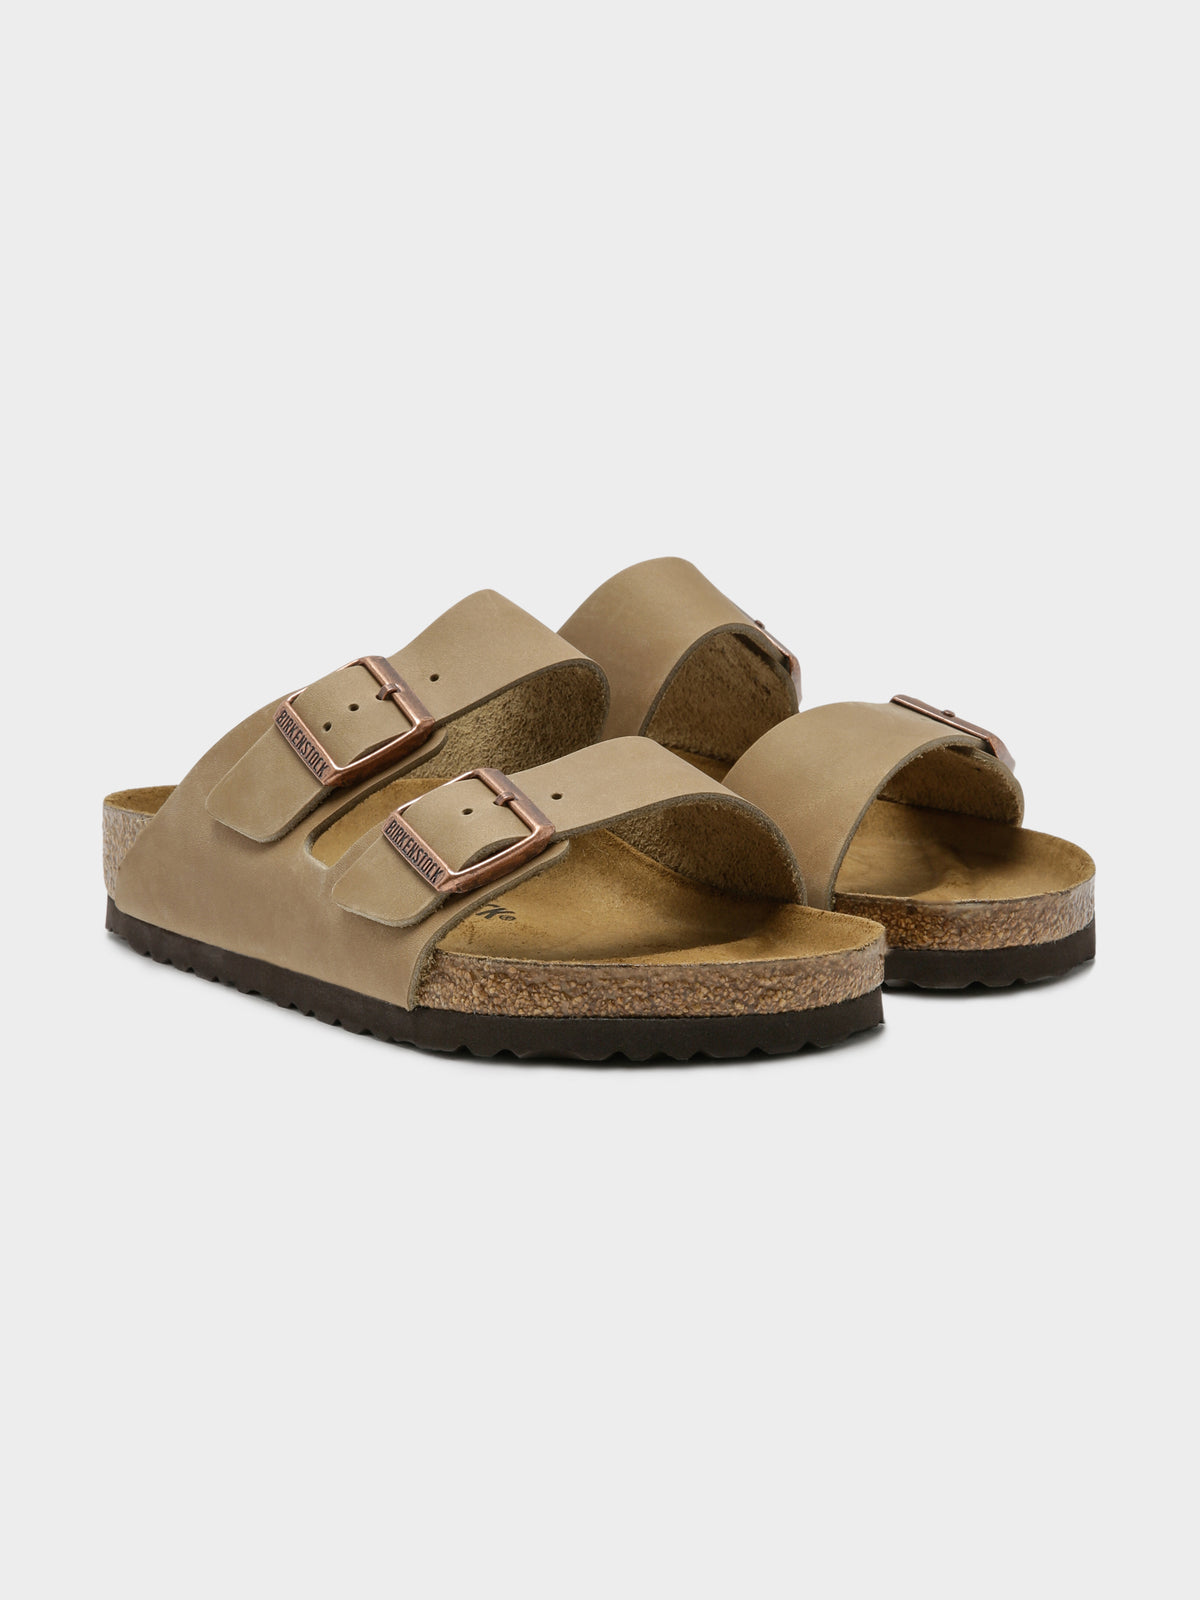 Unisex Arizona Two-Strap Regular Width Sandals in Tobacco Brown Leather